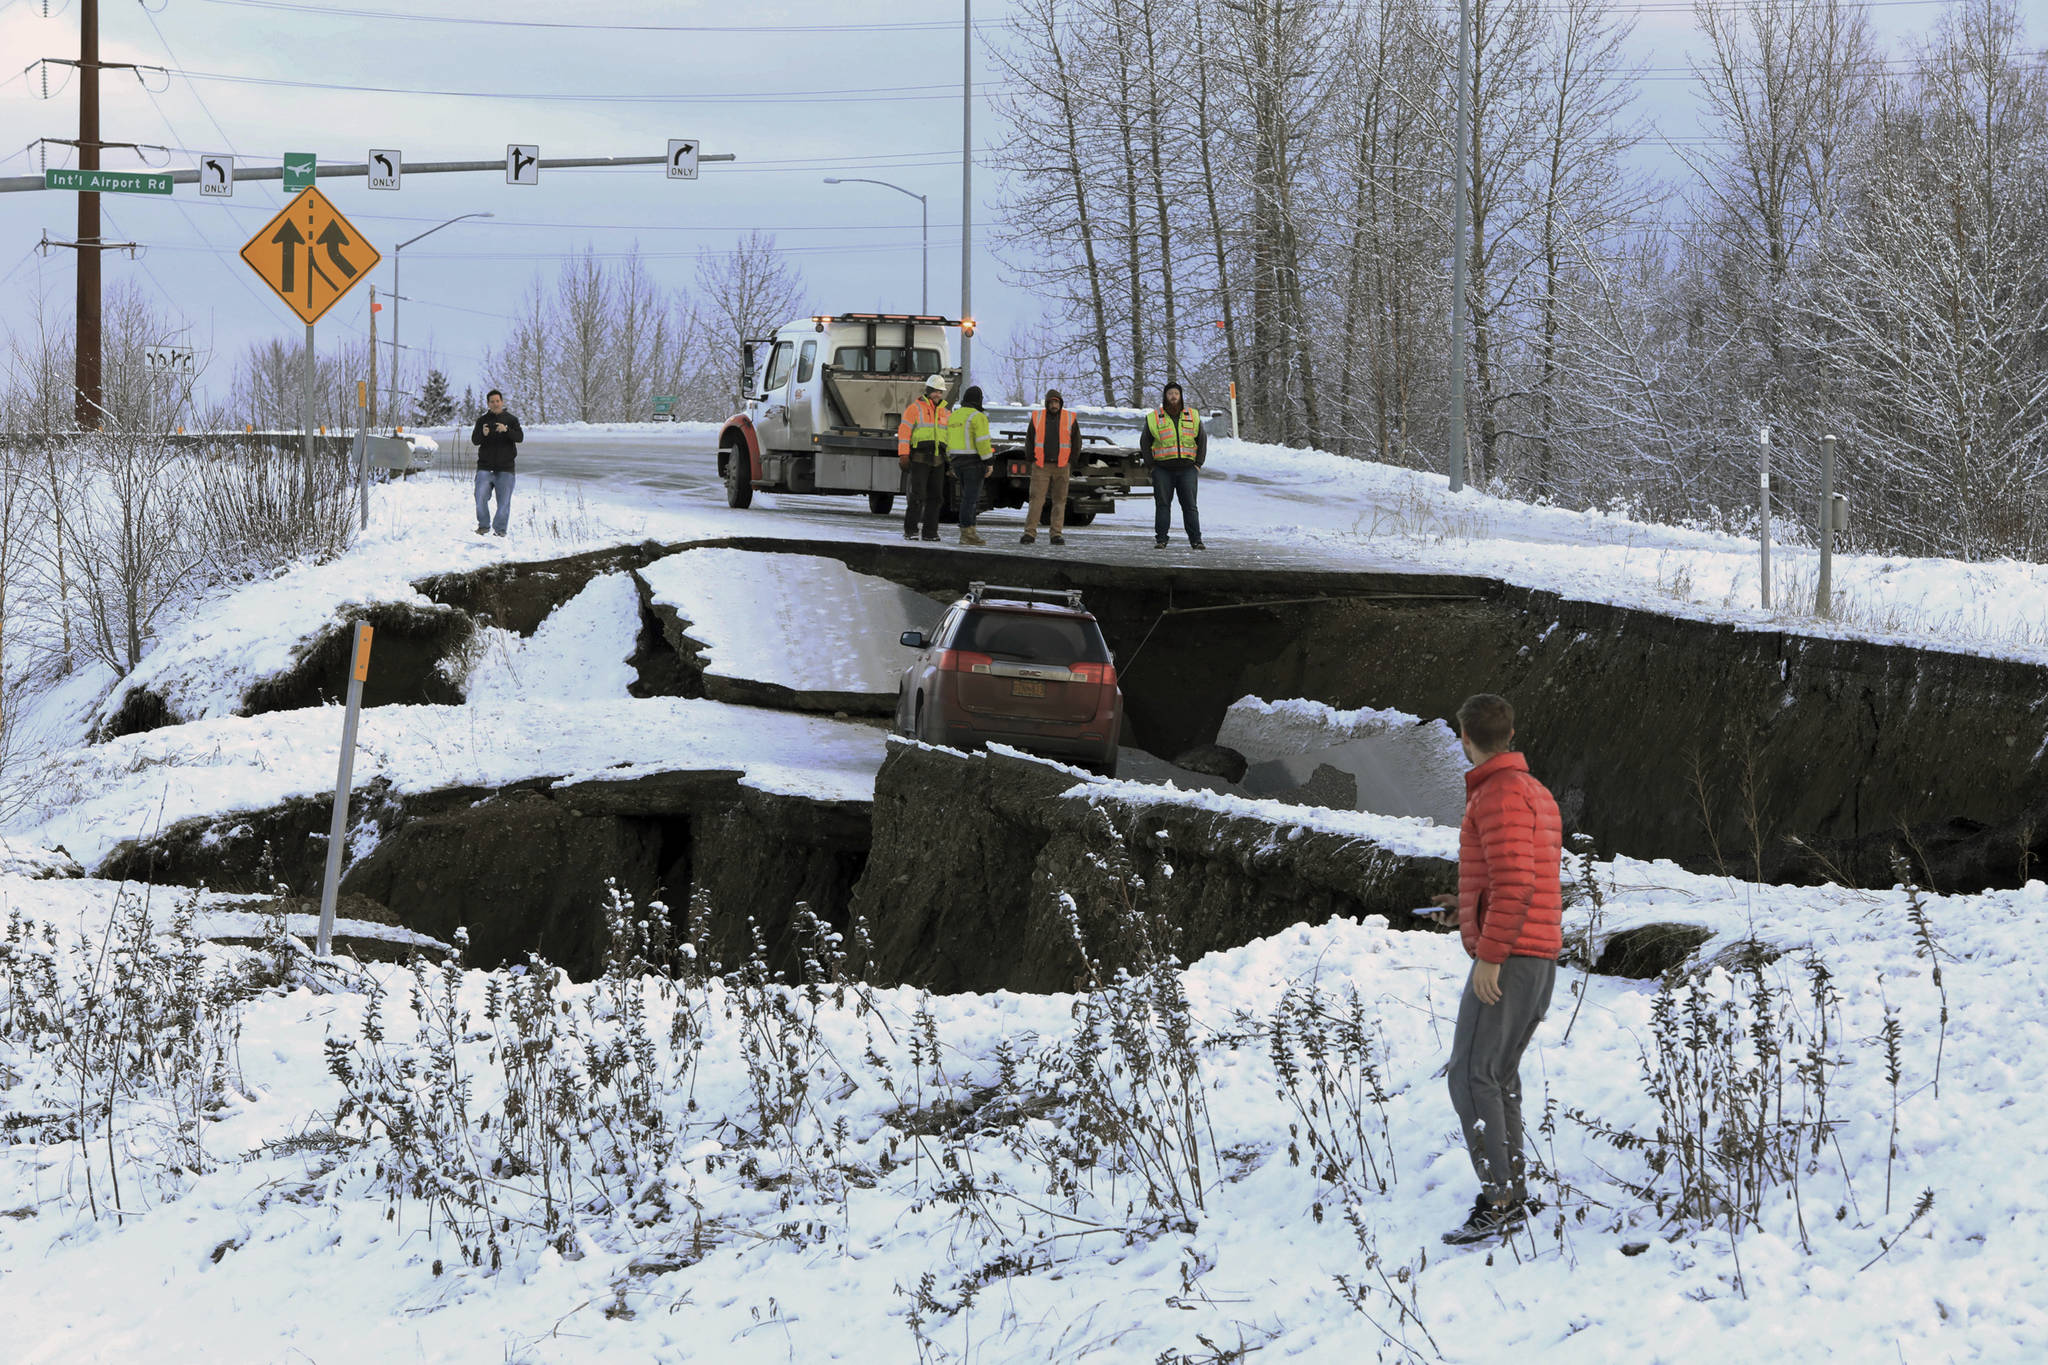 Highway workers and spectators look at a car A car belonging to Homer resident Tom Sulczynski stuck on a section of an off-ramp that collapsed during an earthquake Friday morning, Nov. 30, 2018 in Anchorage, Alaska. The driver was not injured attempting to exit Minnesota Drive at International Airport Road. Back-to-back earthquakes measuring 7.0 and 5.8 rocked buildings and buckled roads Friday morning in Anchorage, prompting people to run from their offices or seek shelter under office desks, while a tsunami warning had some seeking higher ground. (Dan Joling | Associated Press)